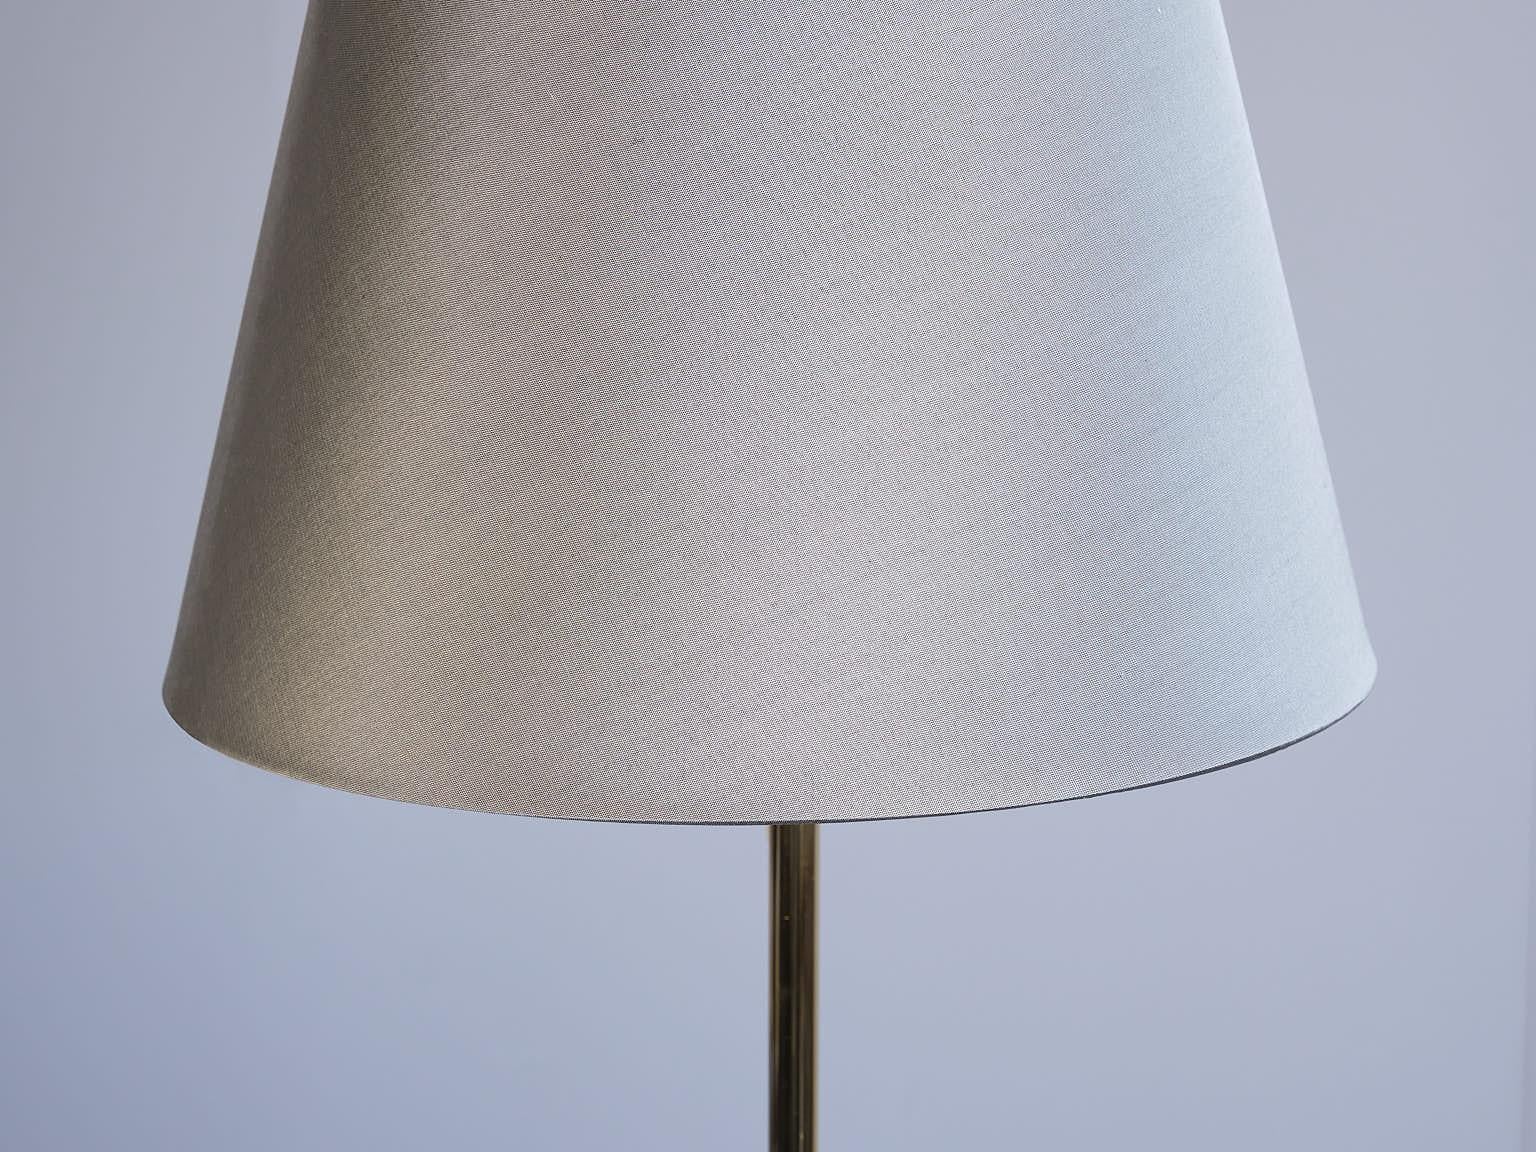 Falkenbergs Belysning Floor Lamp in Glass and Brass, Sweden, 1960s For Sale 2